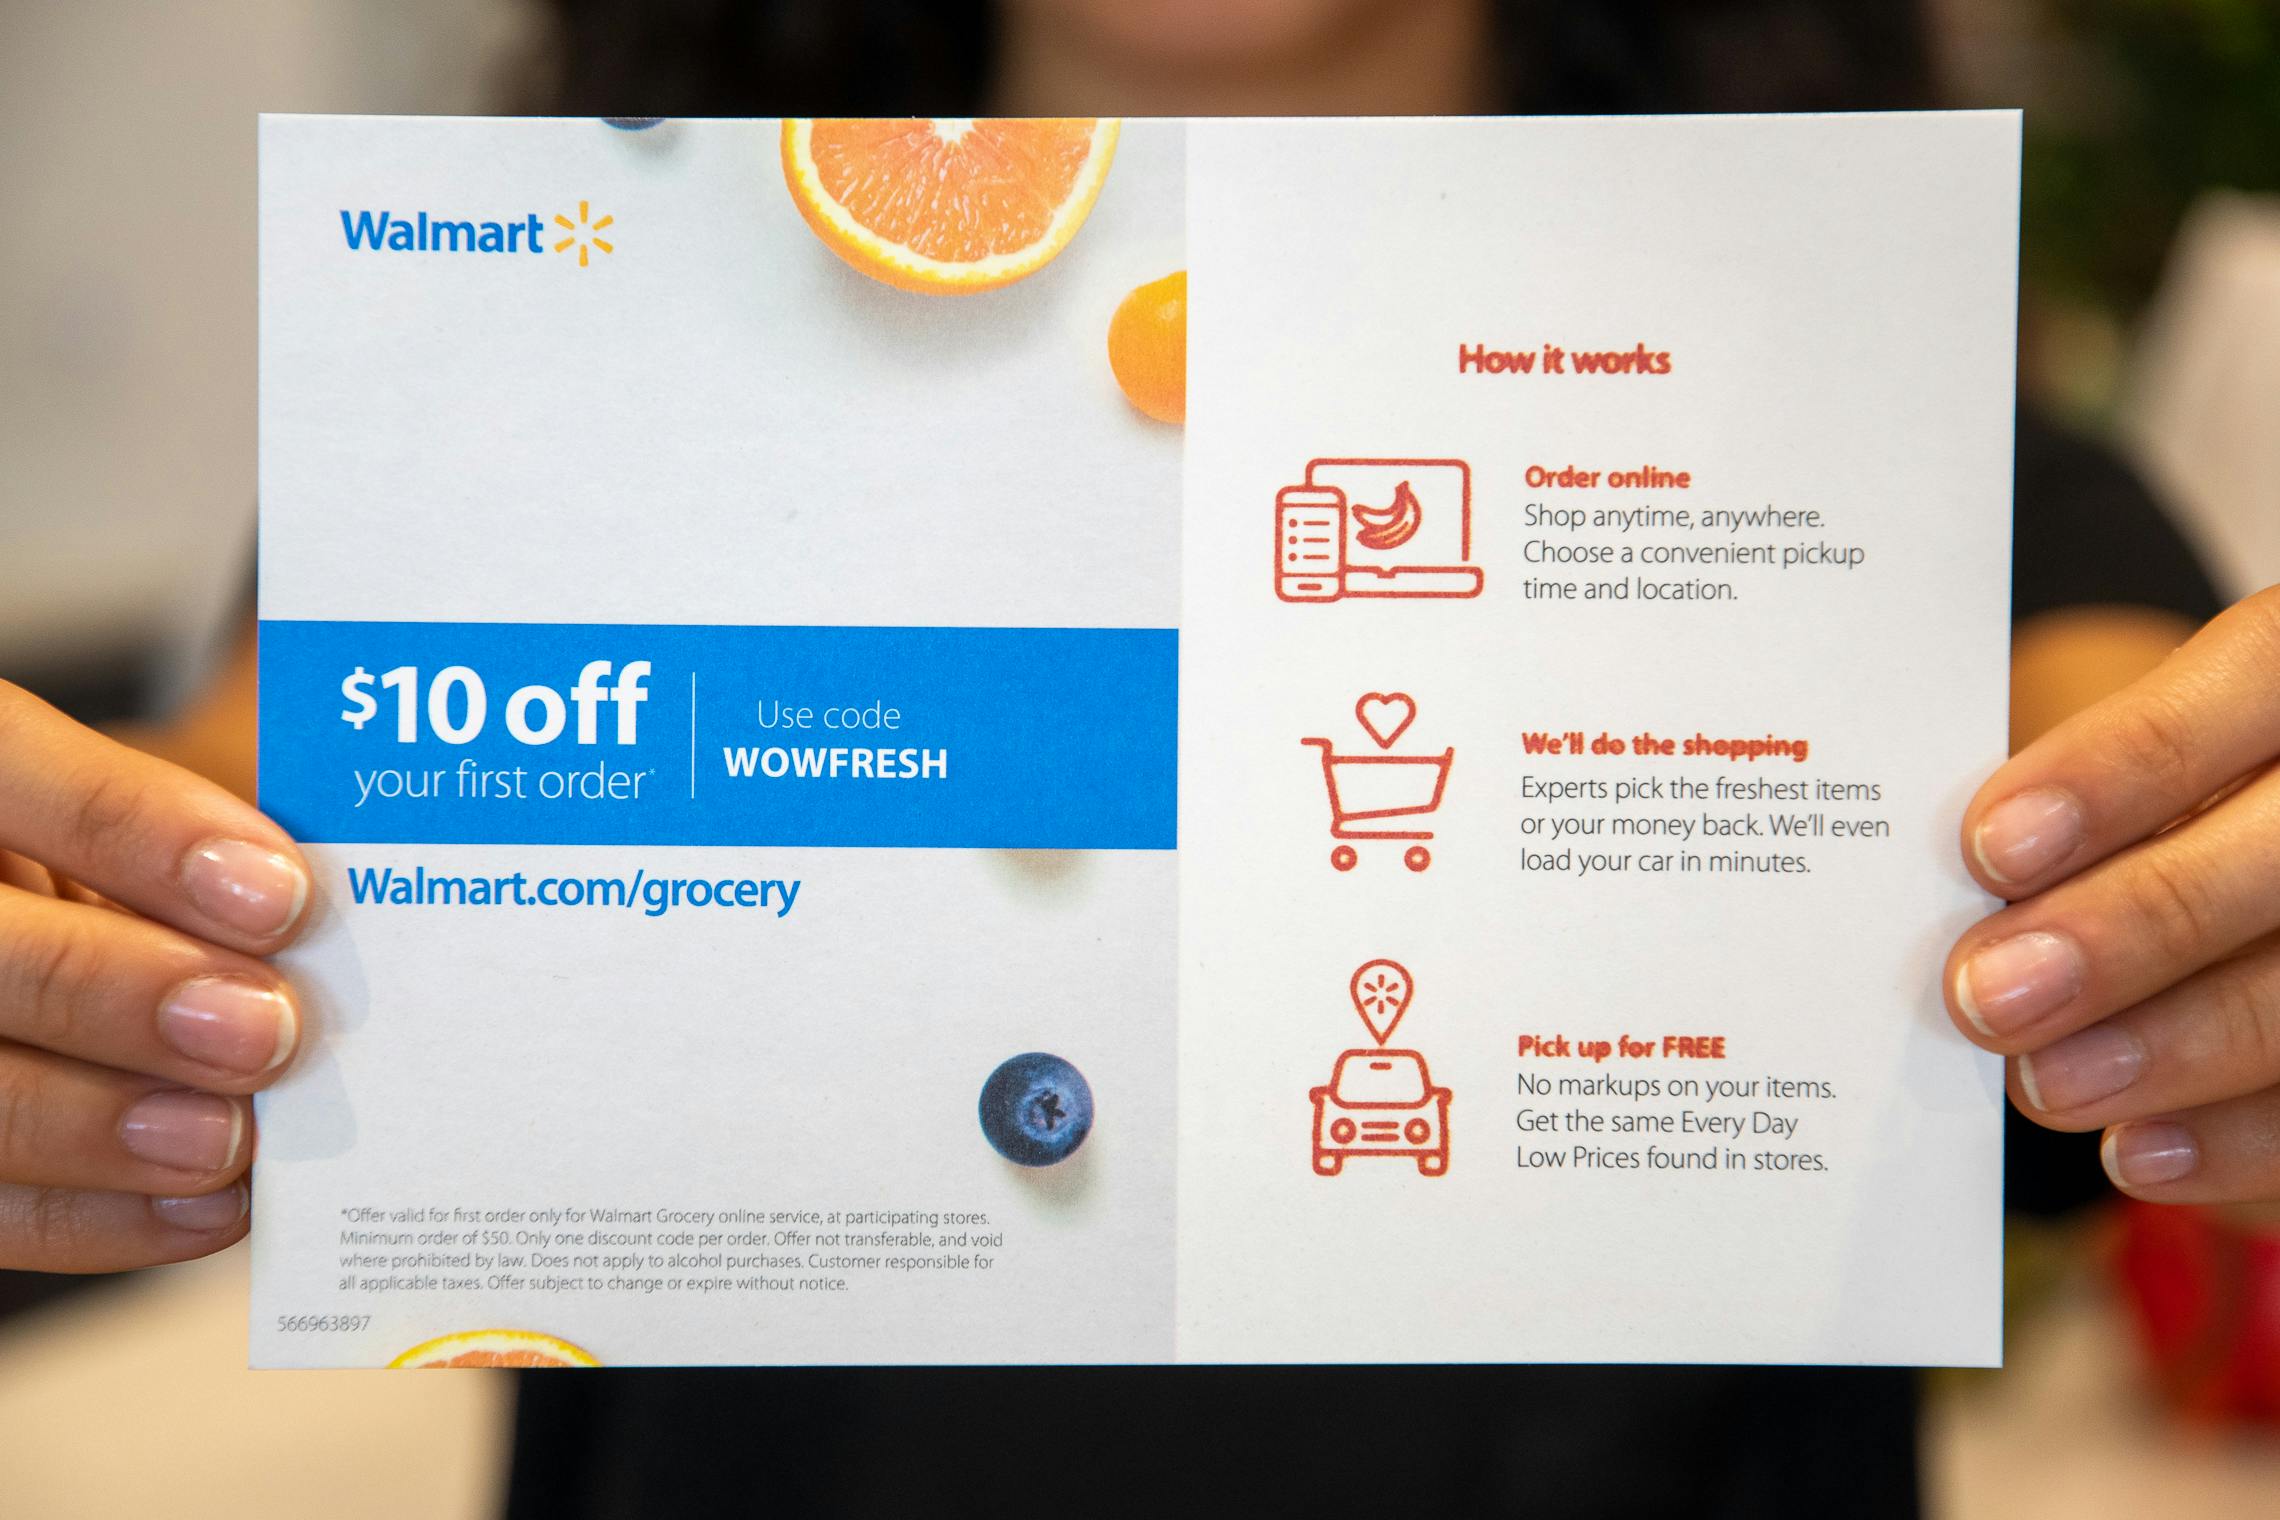 Walmart pamphlet with details and discount code for grocery delivery and pickup.